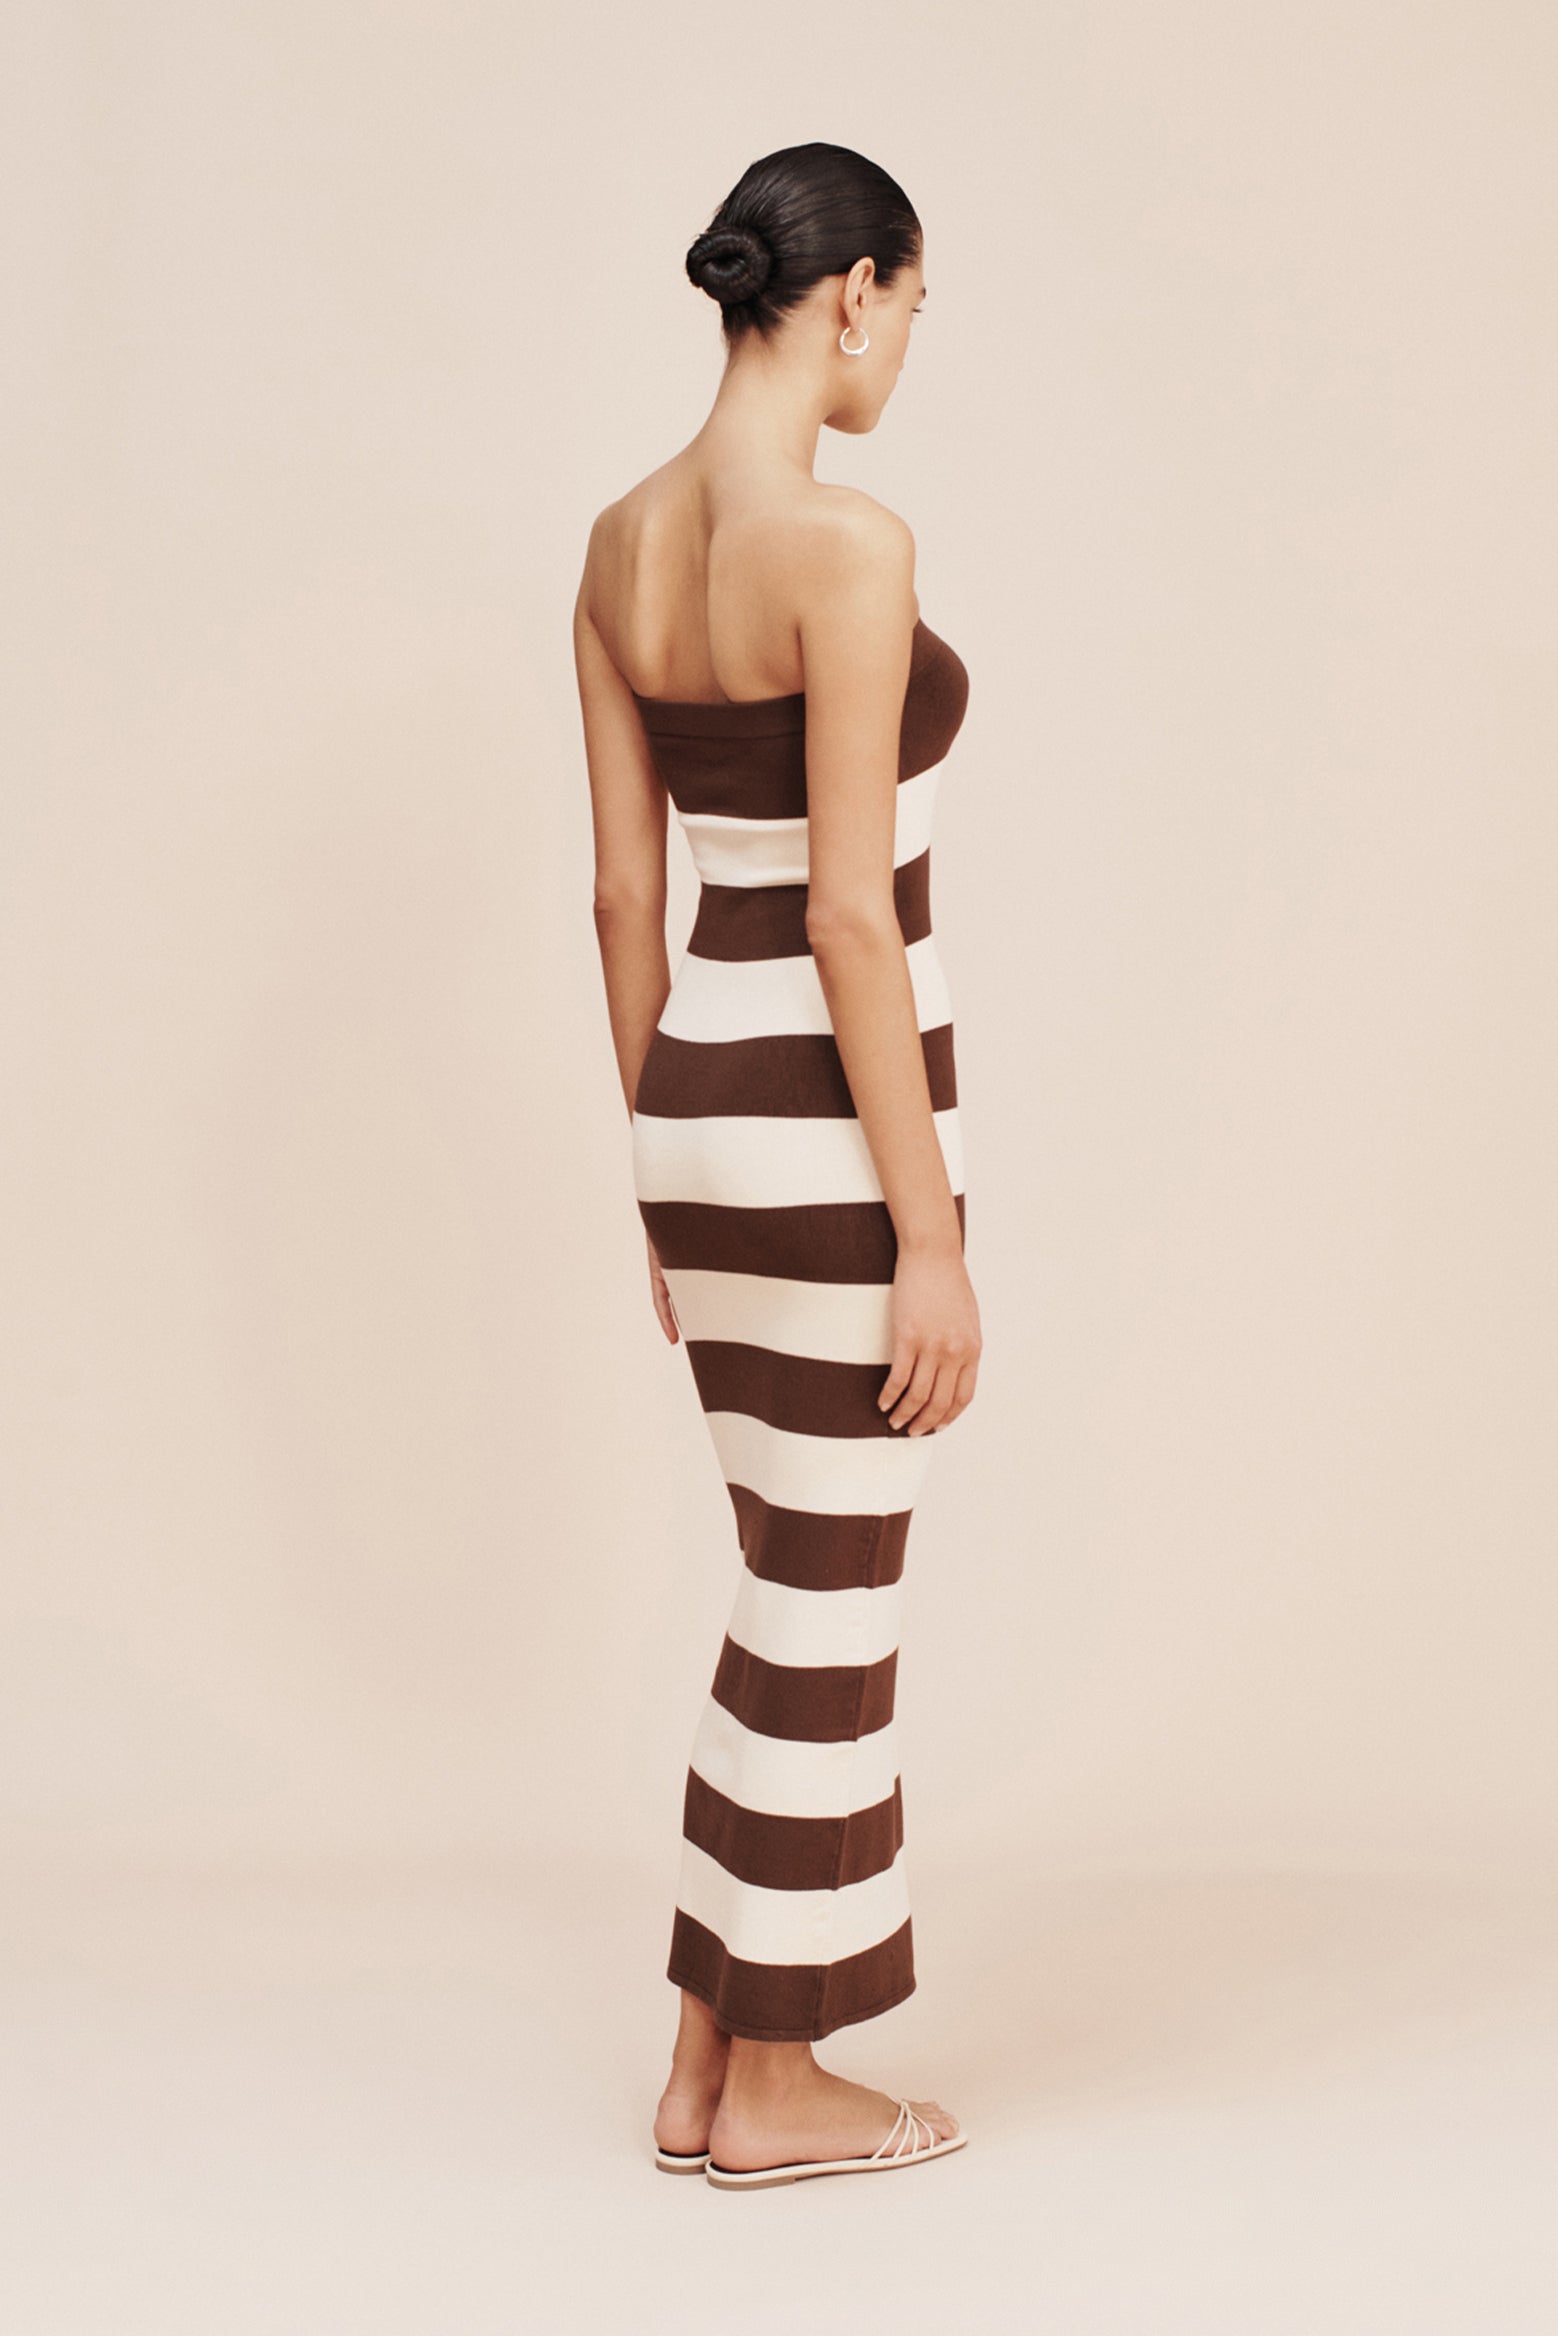 POSSE Theo Maxi Dress in Chocolate/Cream available at The New Trend Australia.